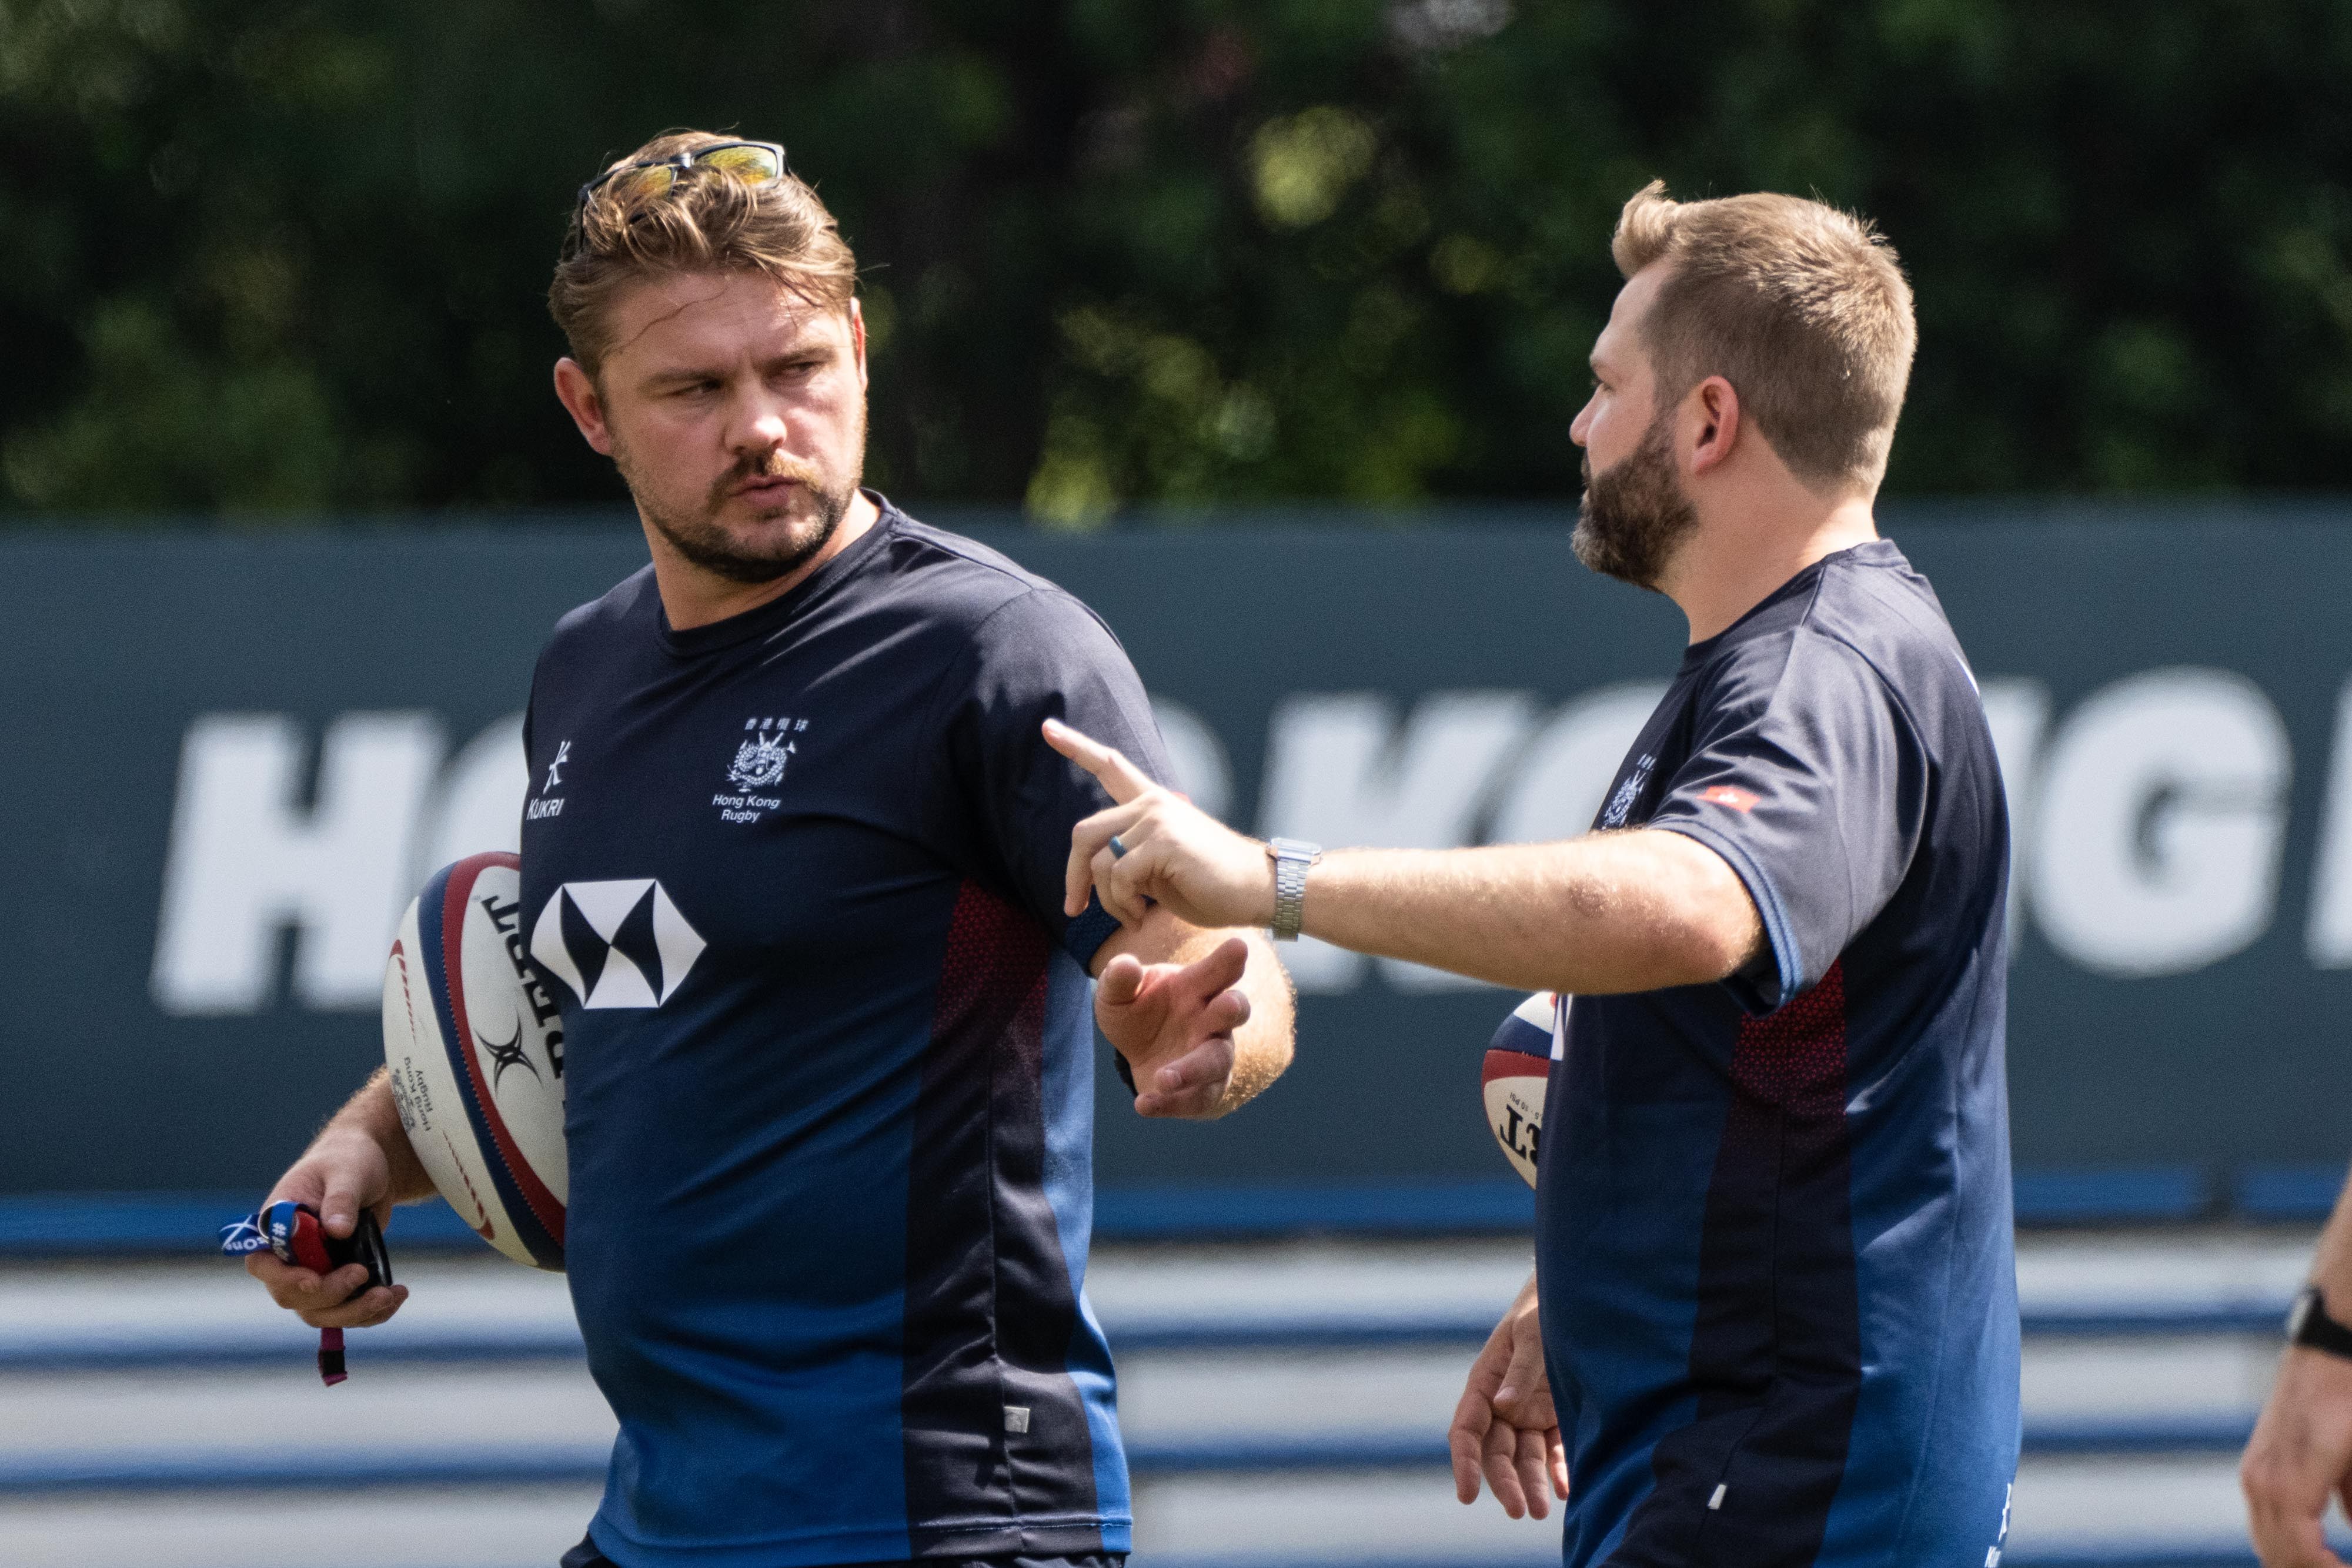 Hong Kong head coach Lewis Evans (right) chats with backs coach Joe Barker at a training session at King’s Park before the team left for Dubai. Photo: HKRU